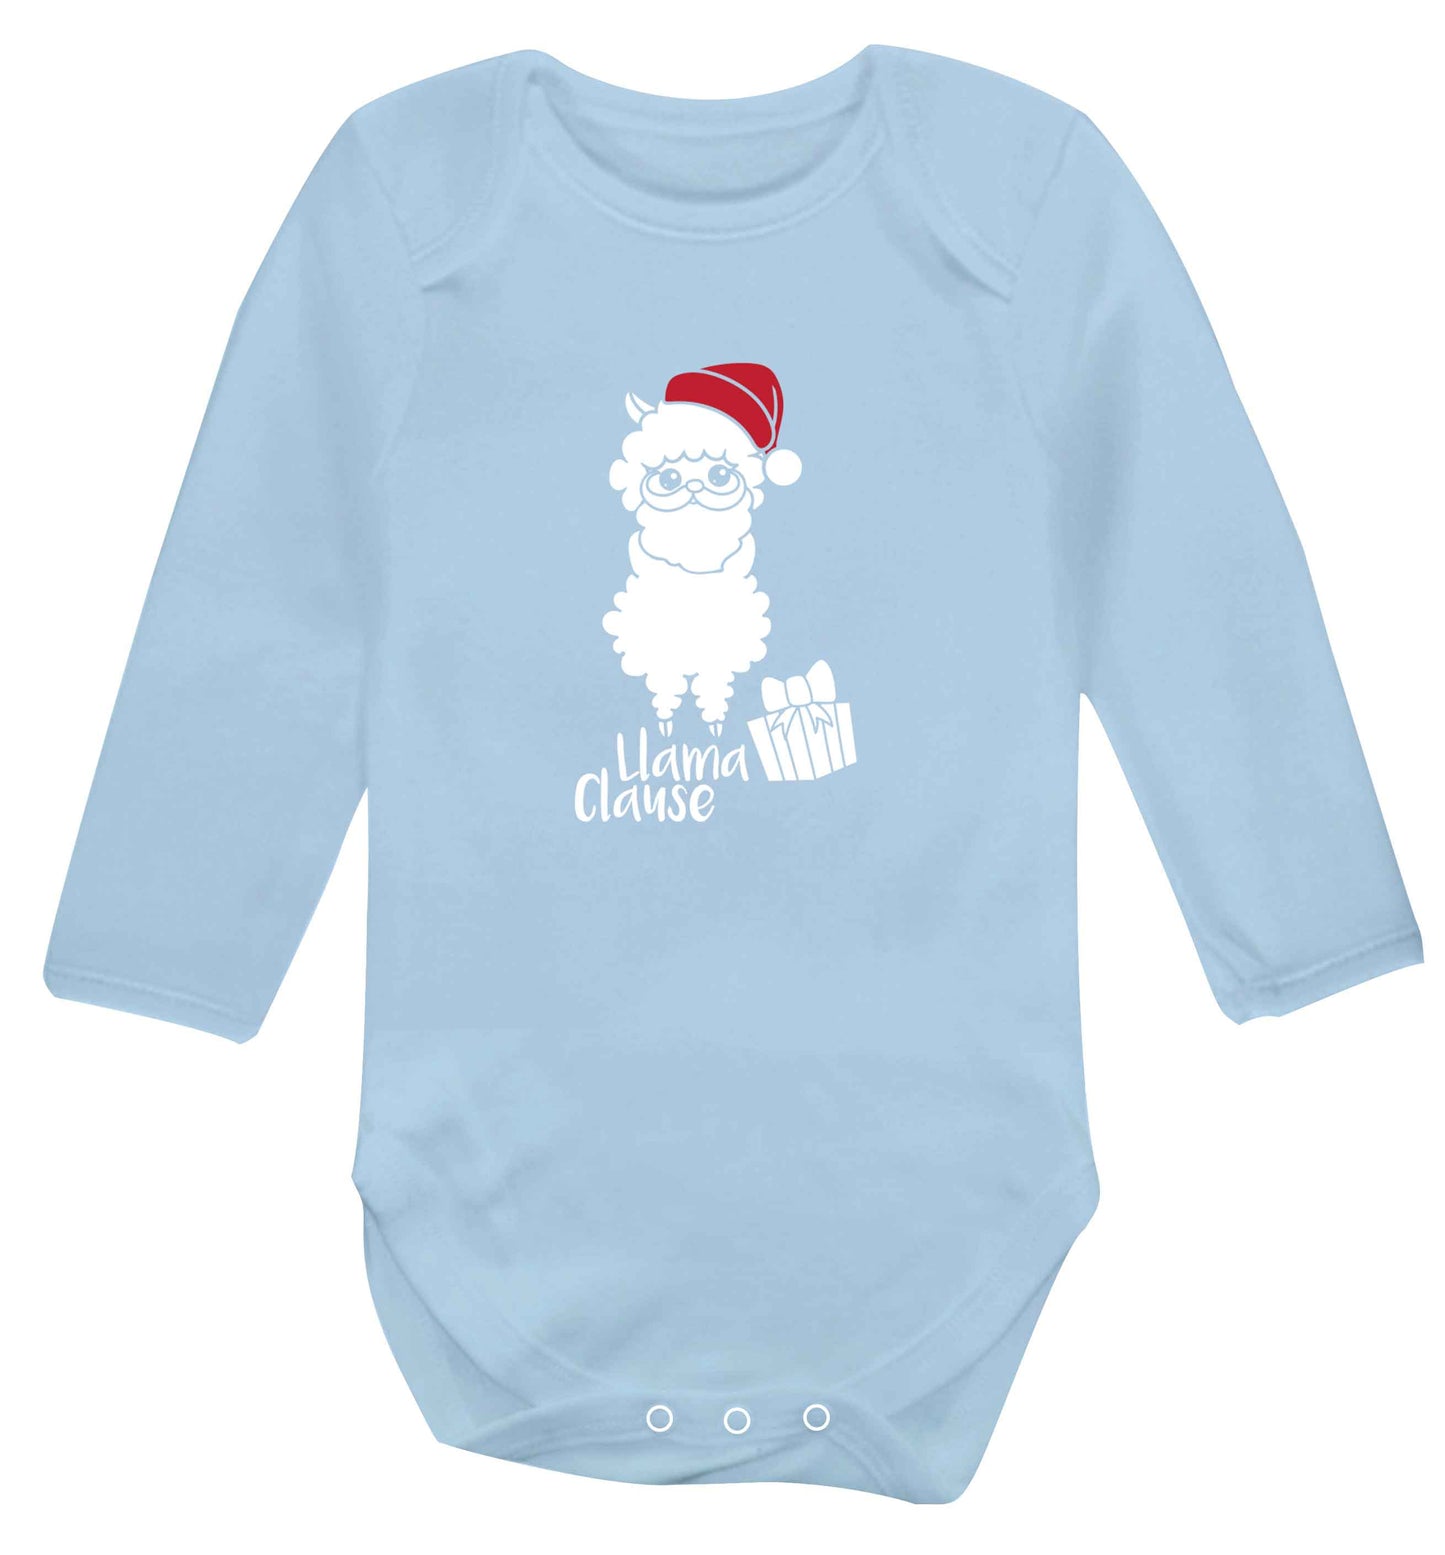 Llama Clause baby vest long sleeved pale blue 6-12 months